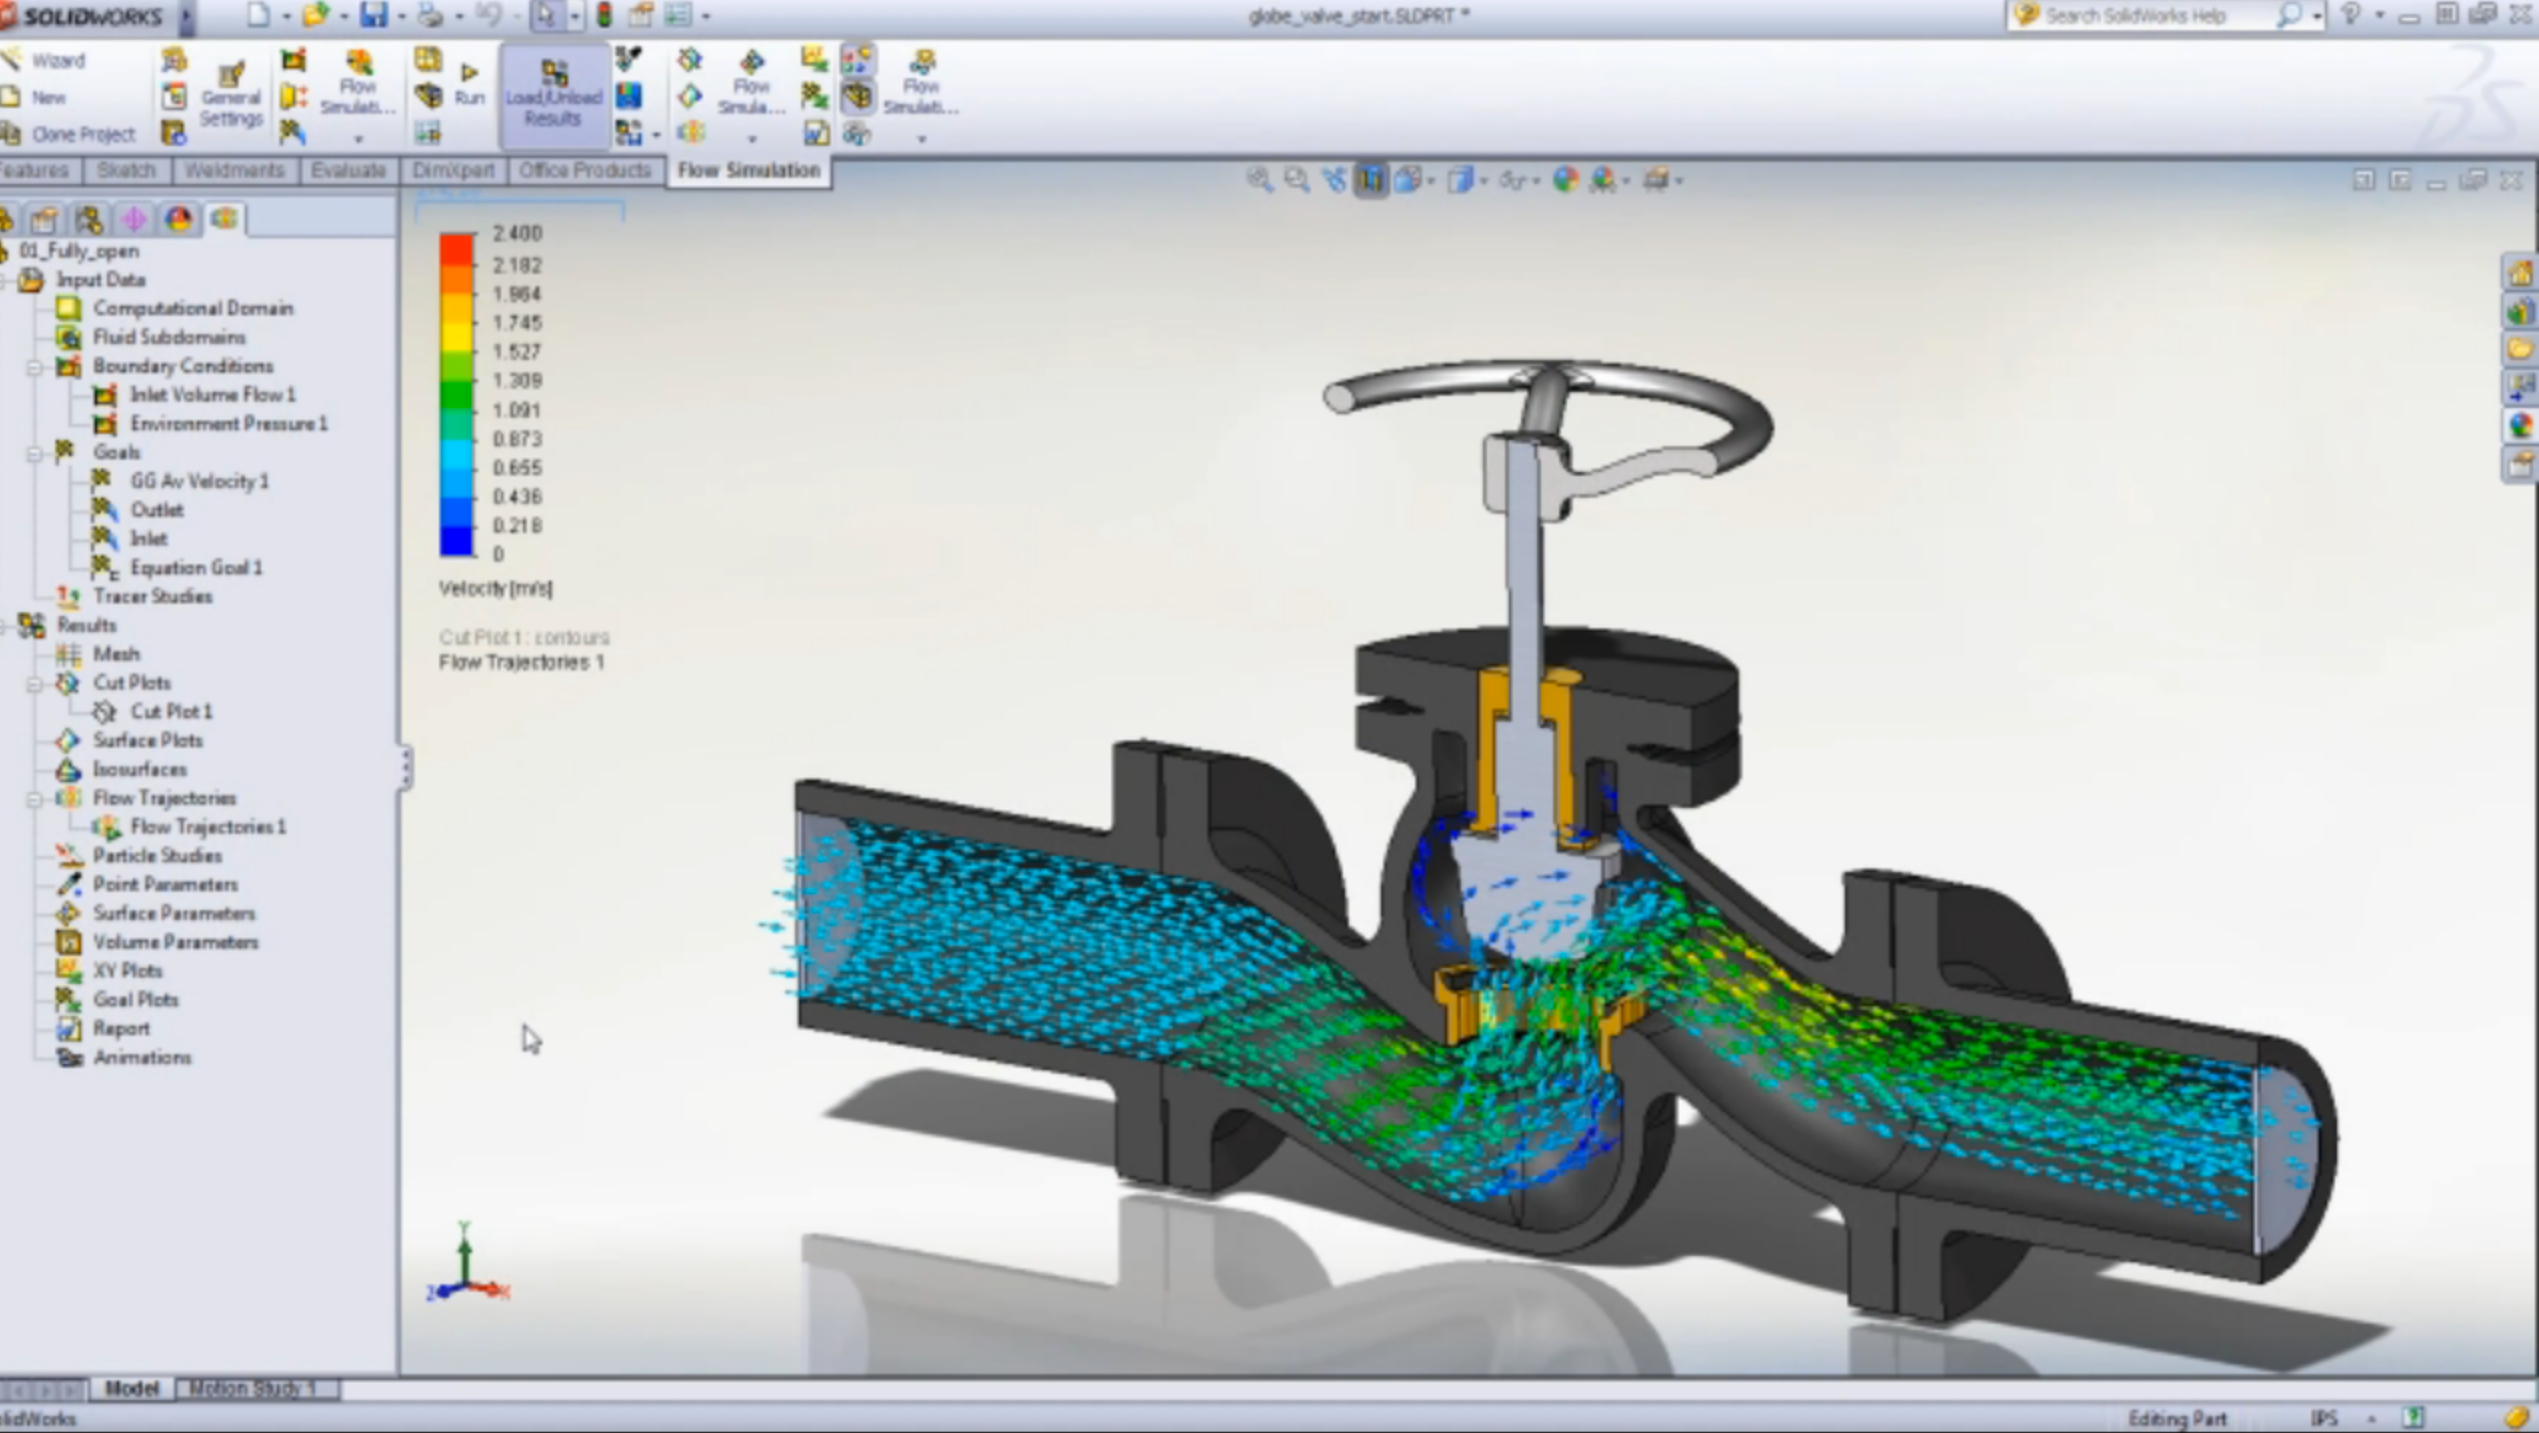 SolidWorks Vision 2014+ TechClarity